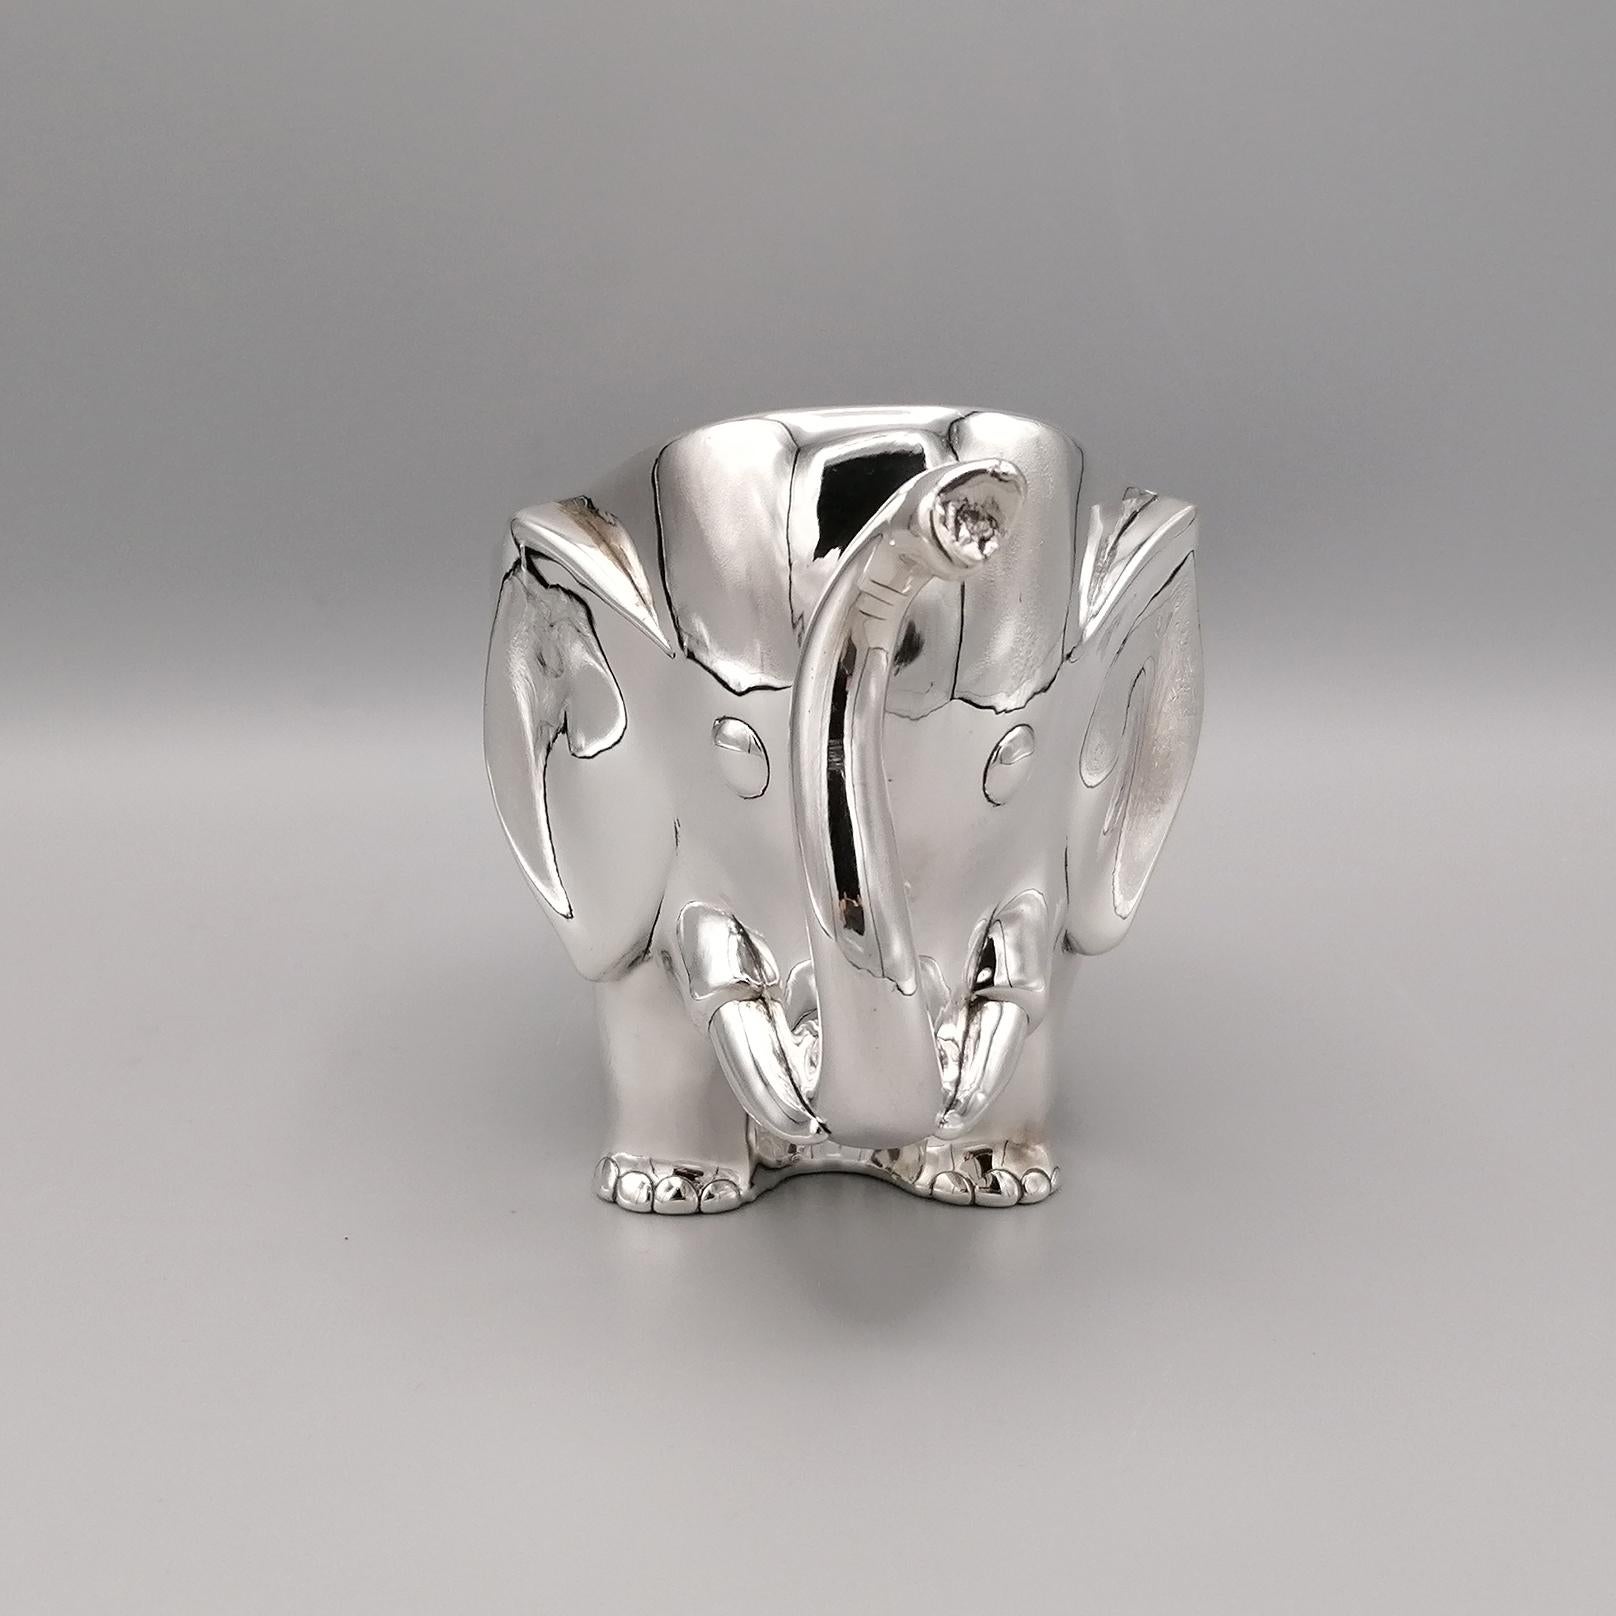 Other 20th Century Sterling Silver Stylized Elephant Shaped Soap / Candy Holder